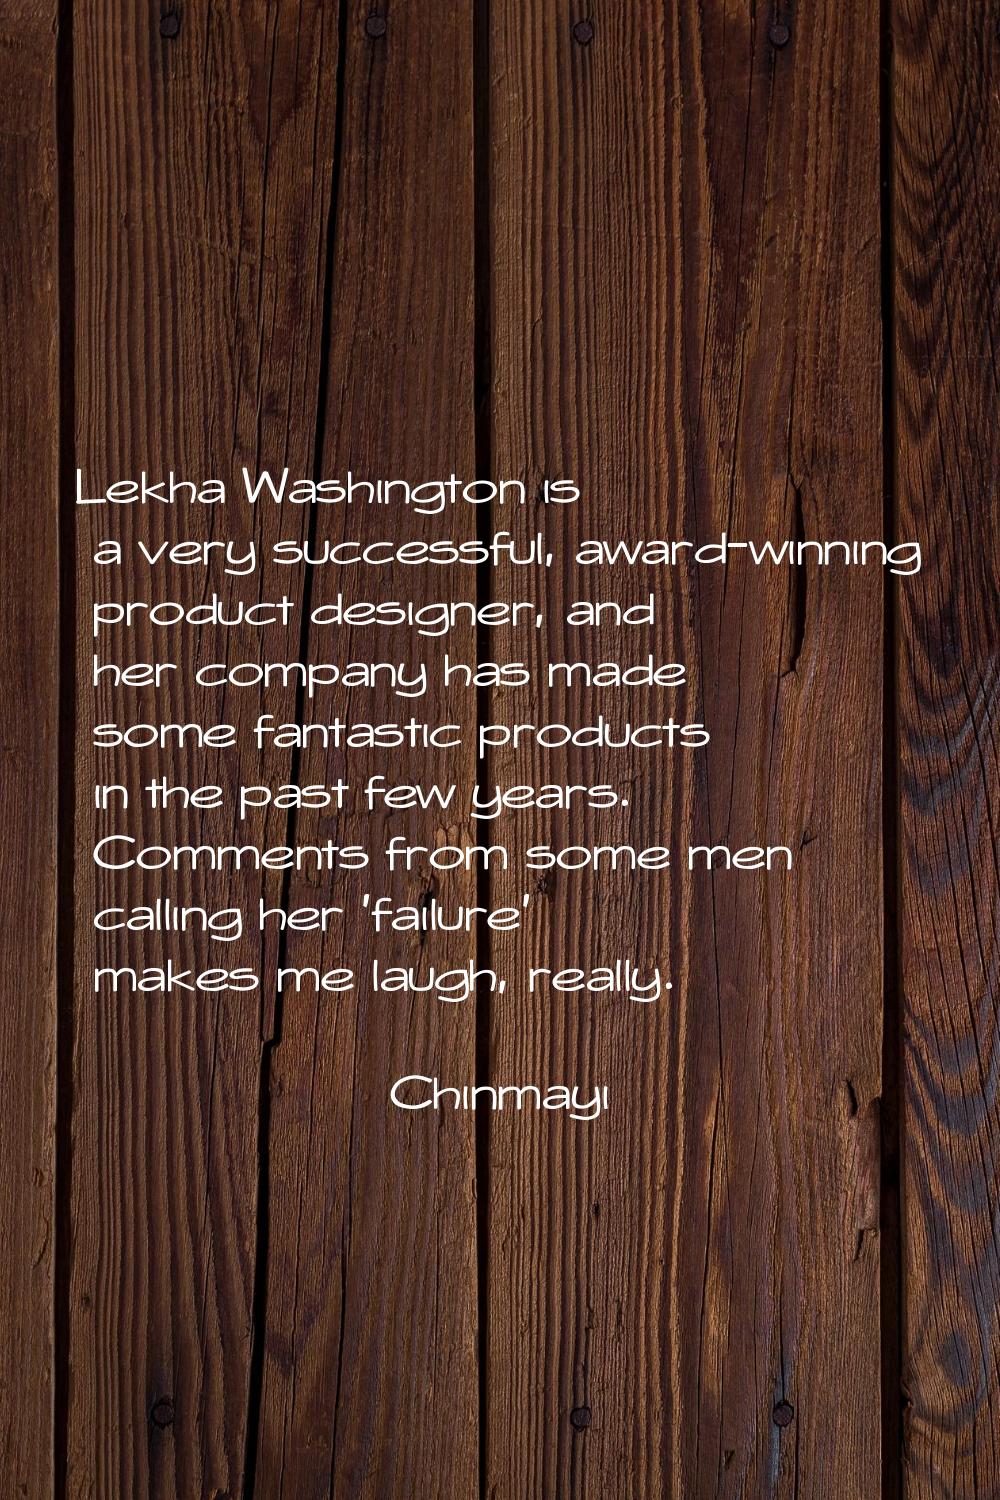 Lekha Washington is a very successful, award-winning product designer, and her company has made som